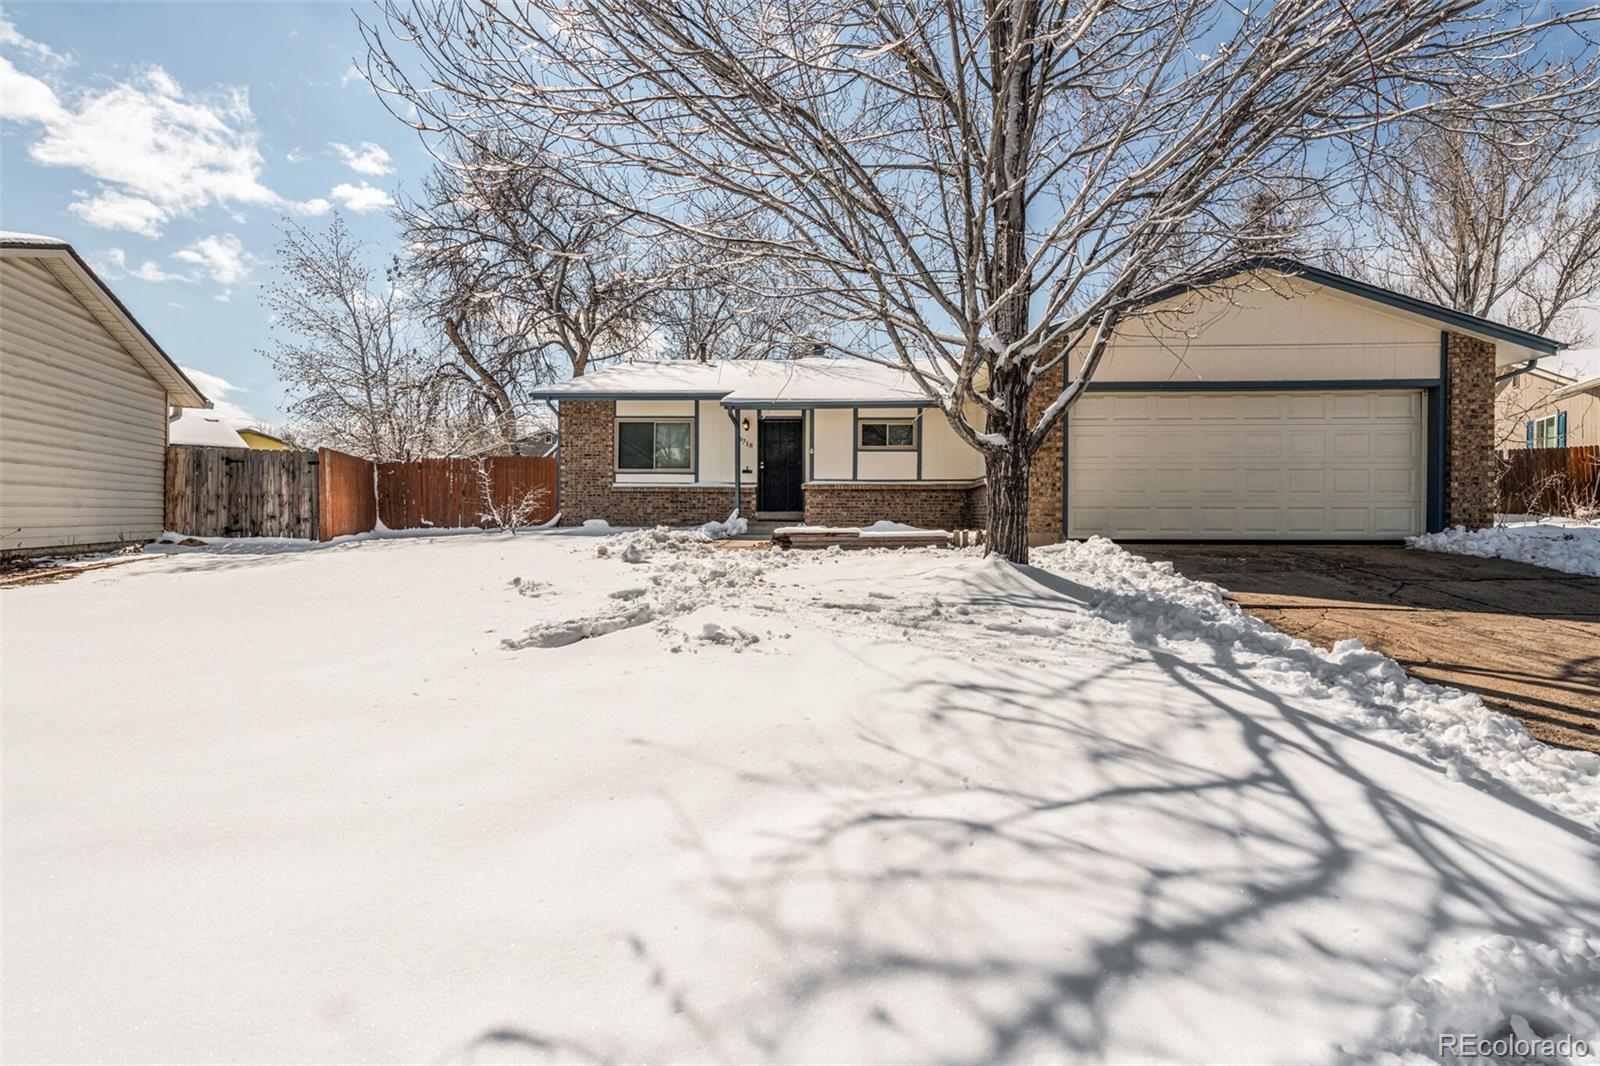 8718 w 86th avenue, Arvada sold home. Closed on 2024-04-15 for $530,000.